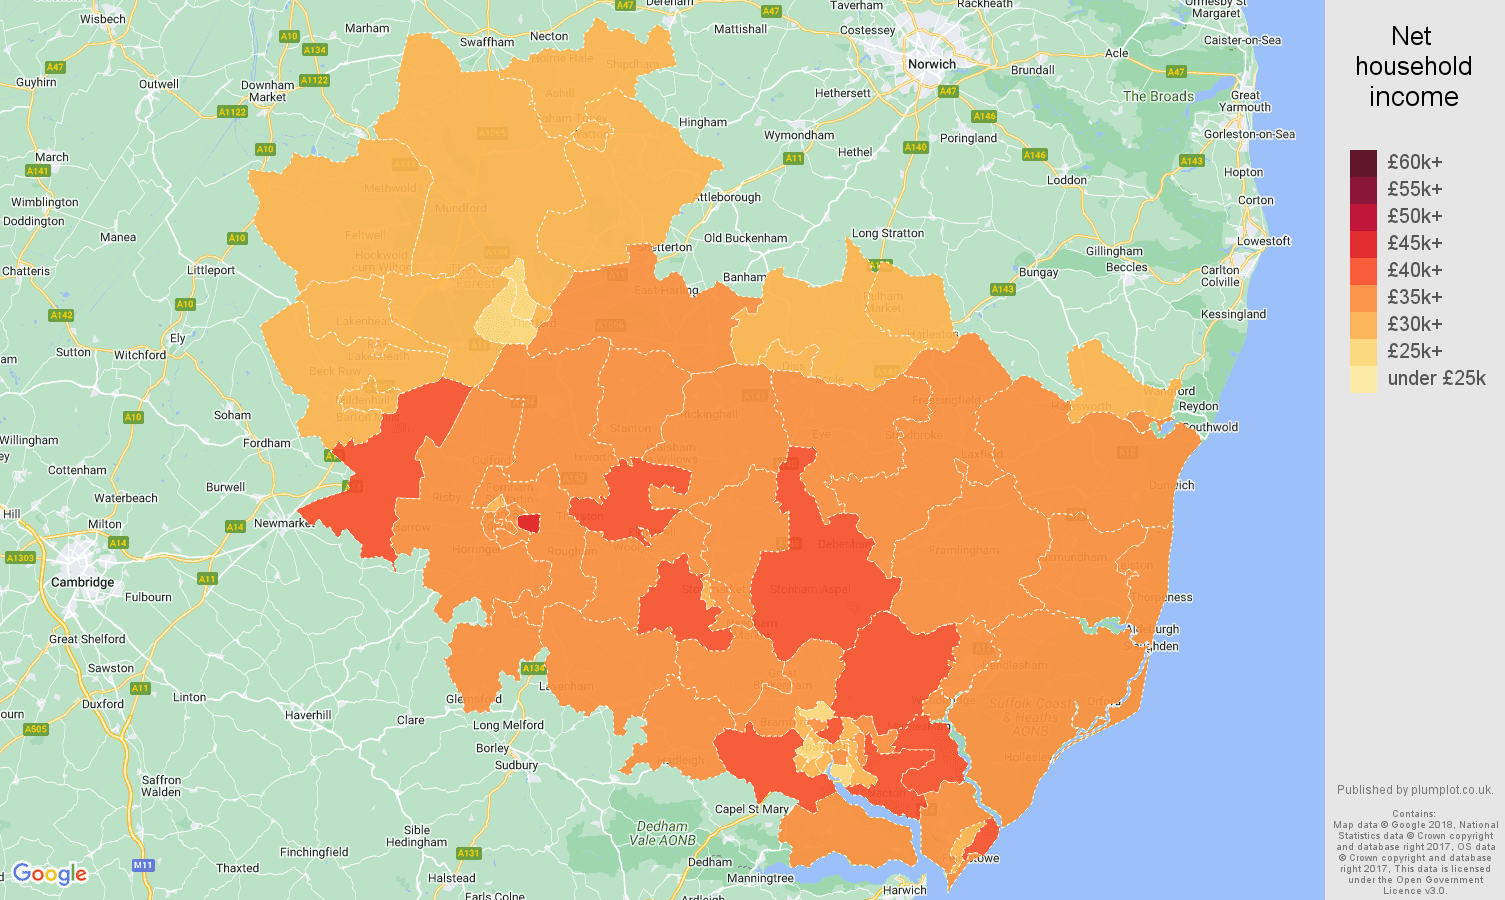 Ipswich net household income map